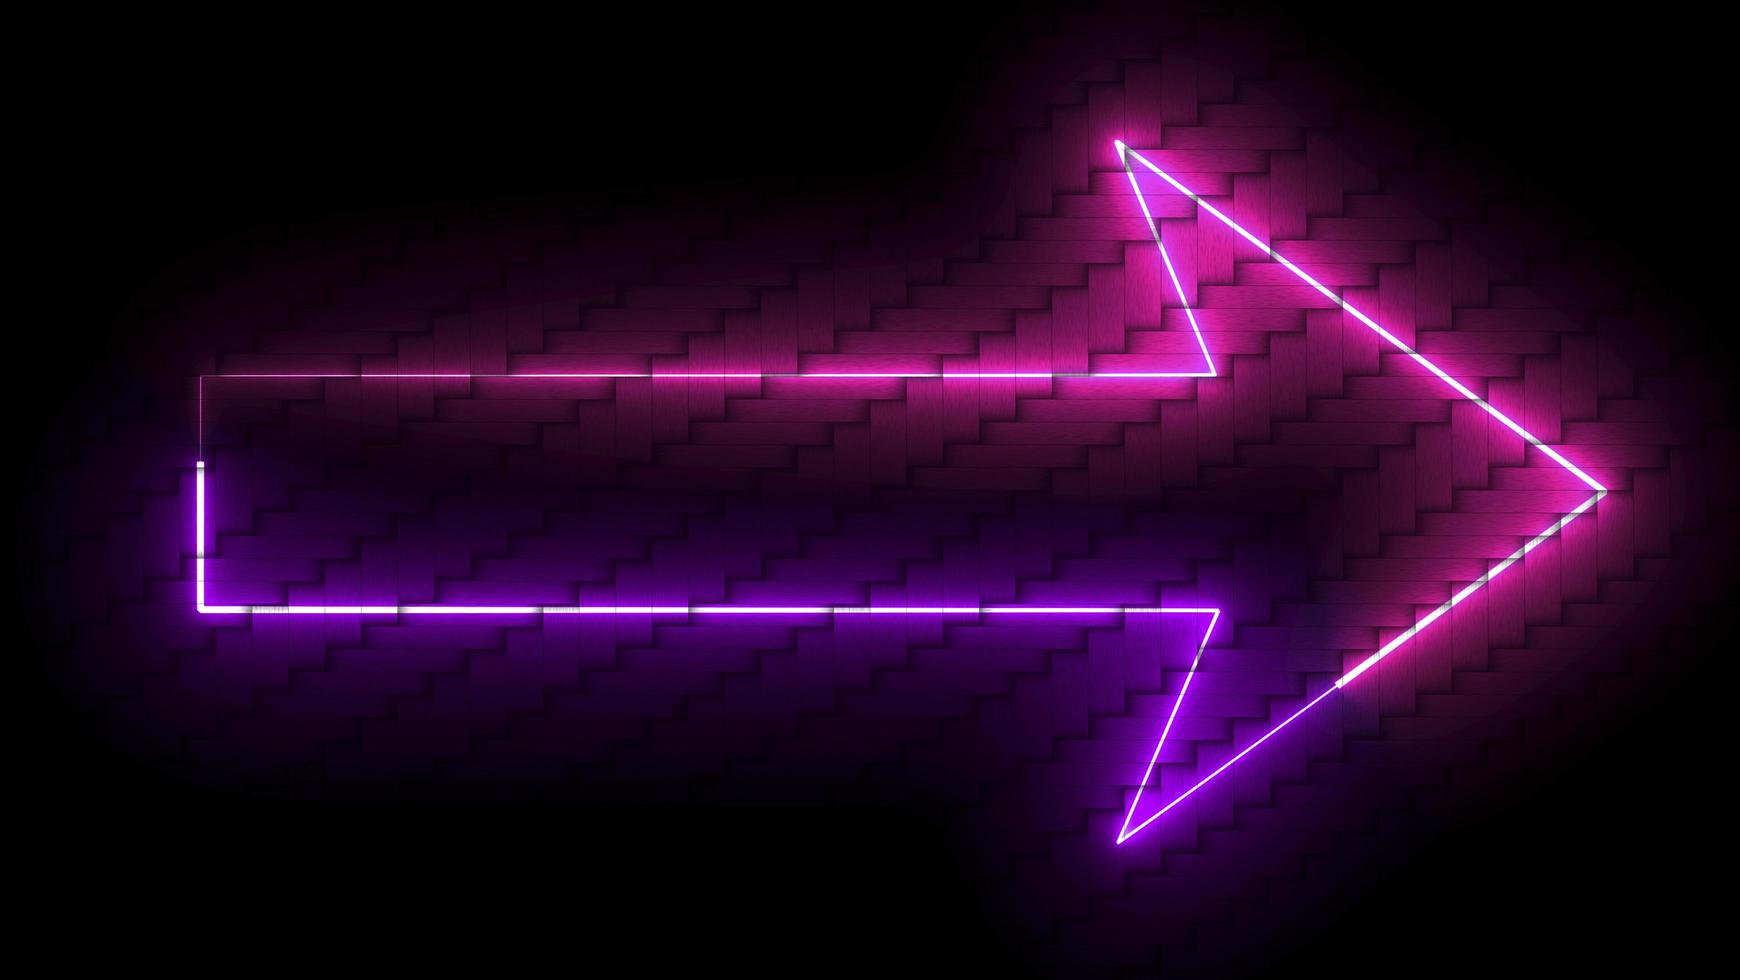 arrow glow pink and purple color laser symbol on bamboo texture photo